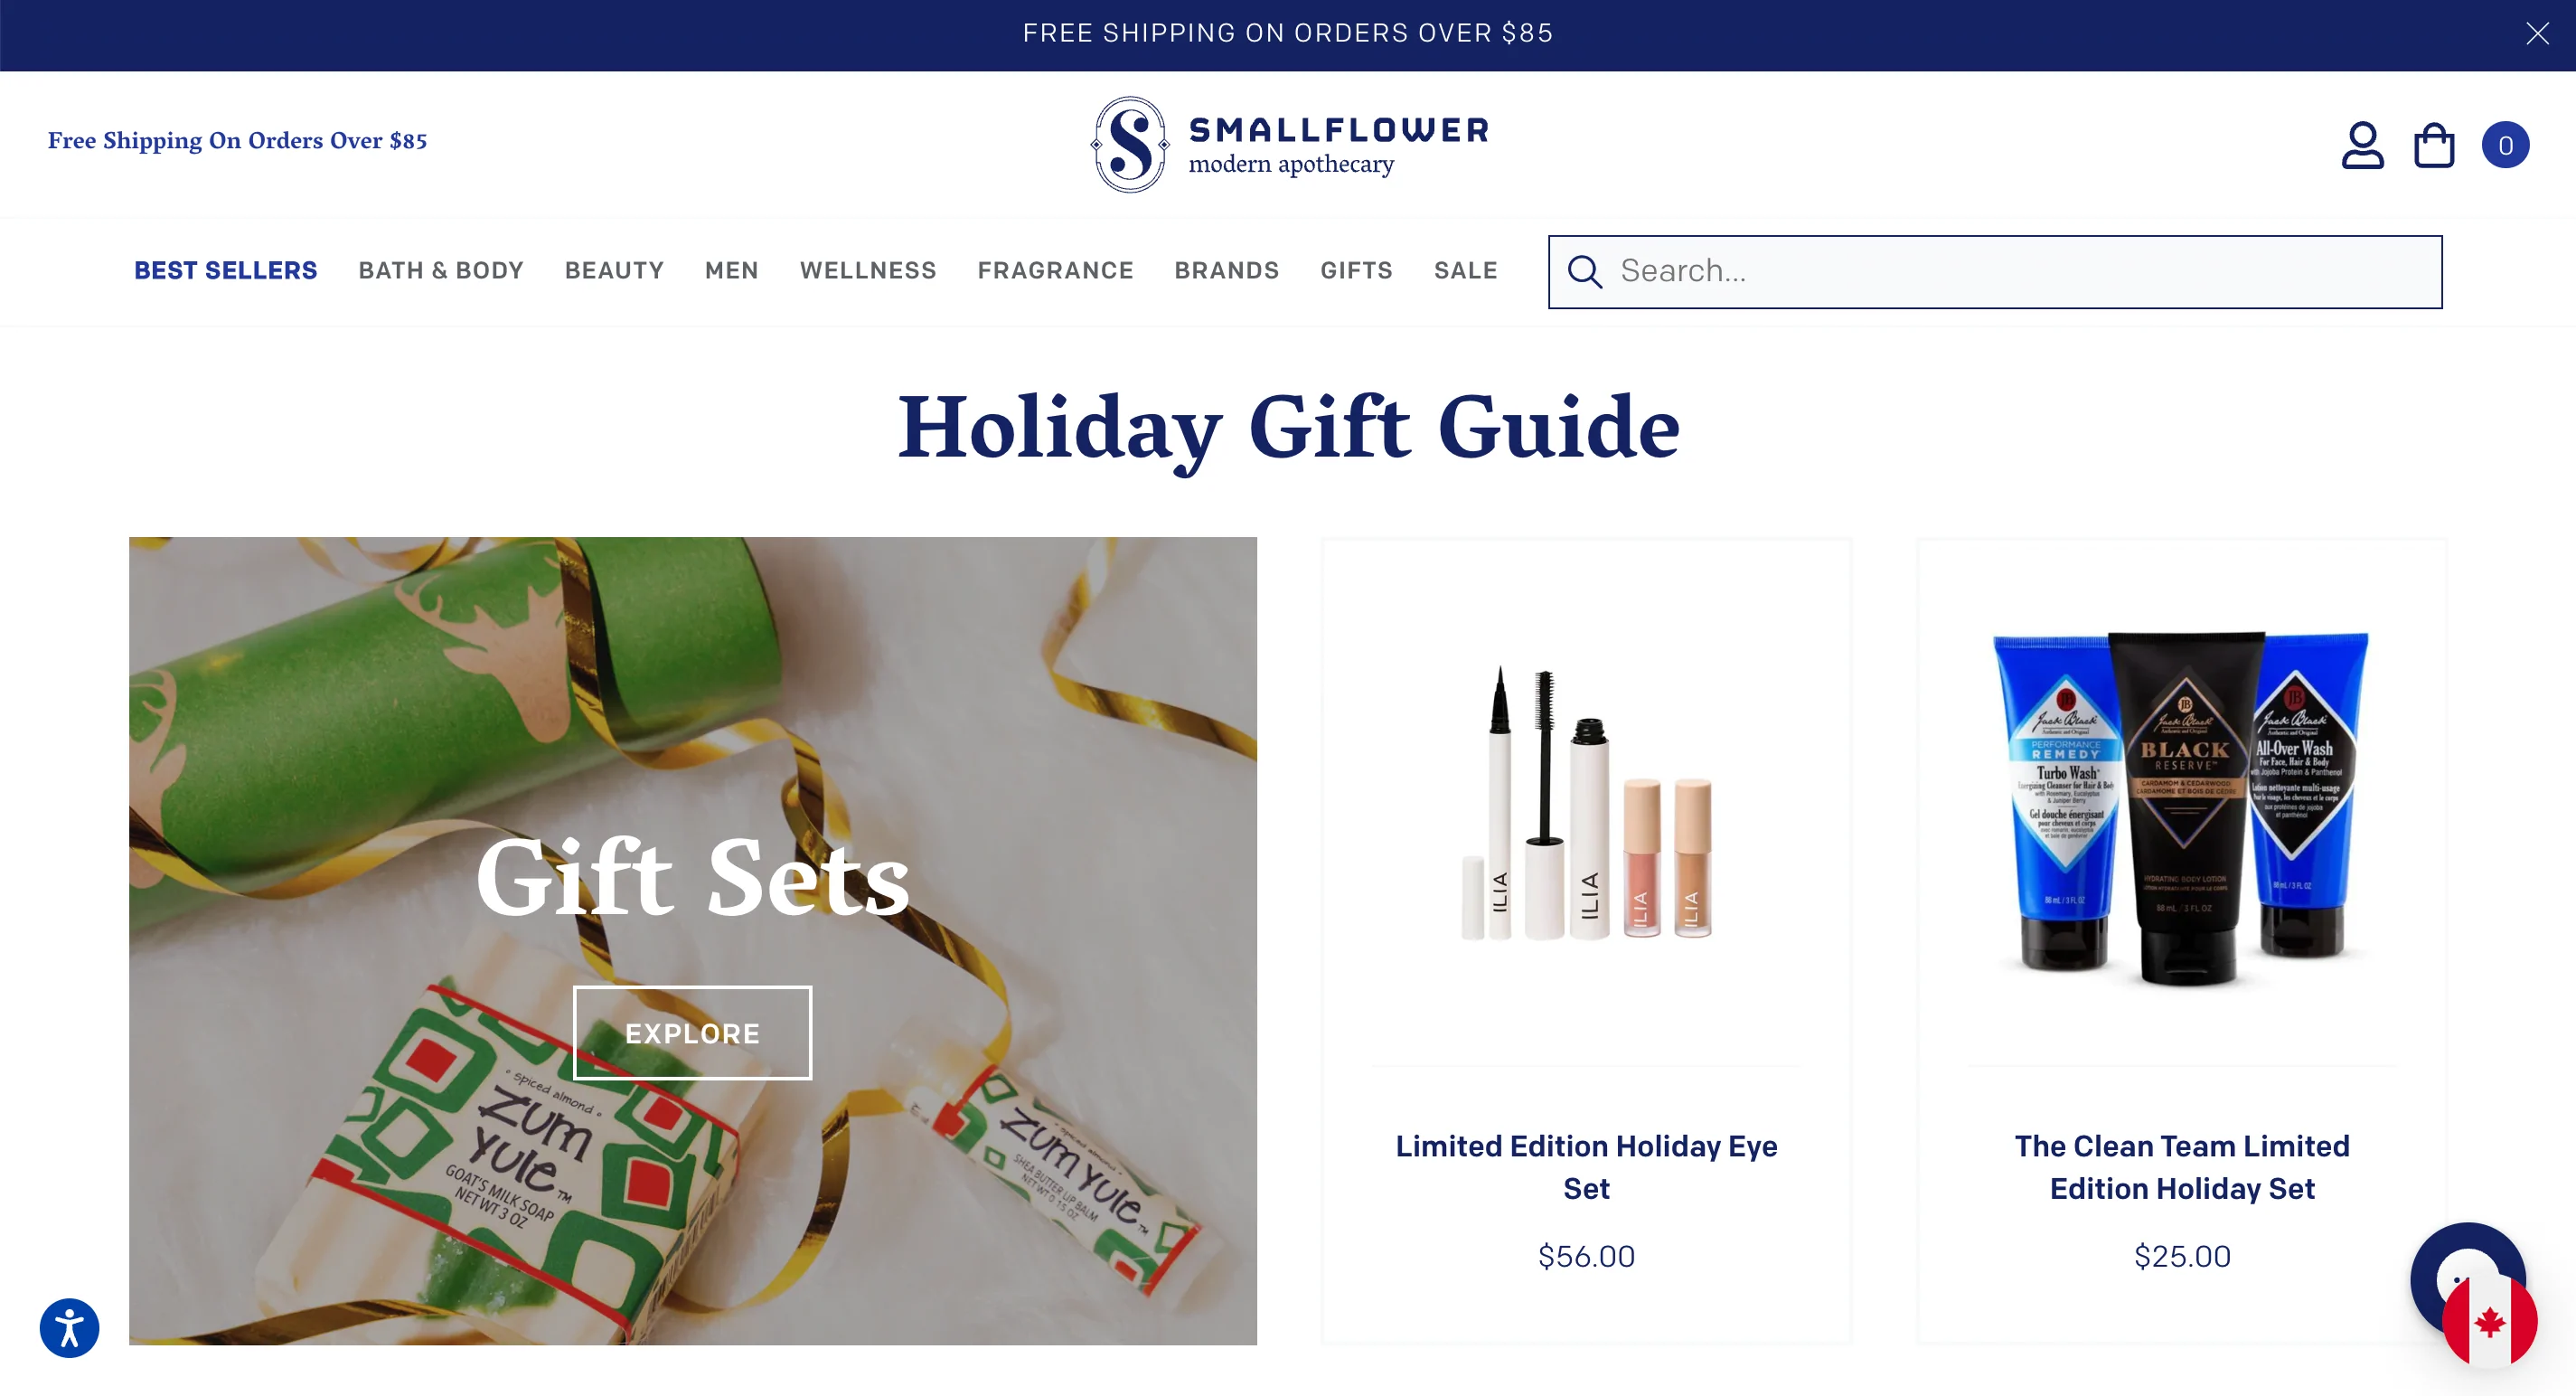 Screengrab of a webpage from Smallflower featuring gift guides